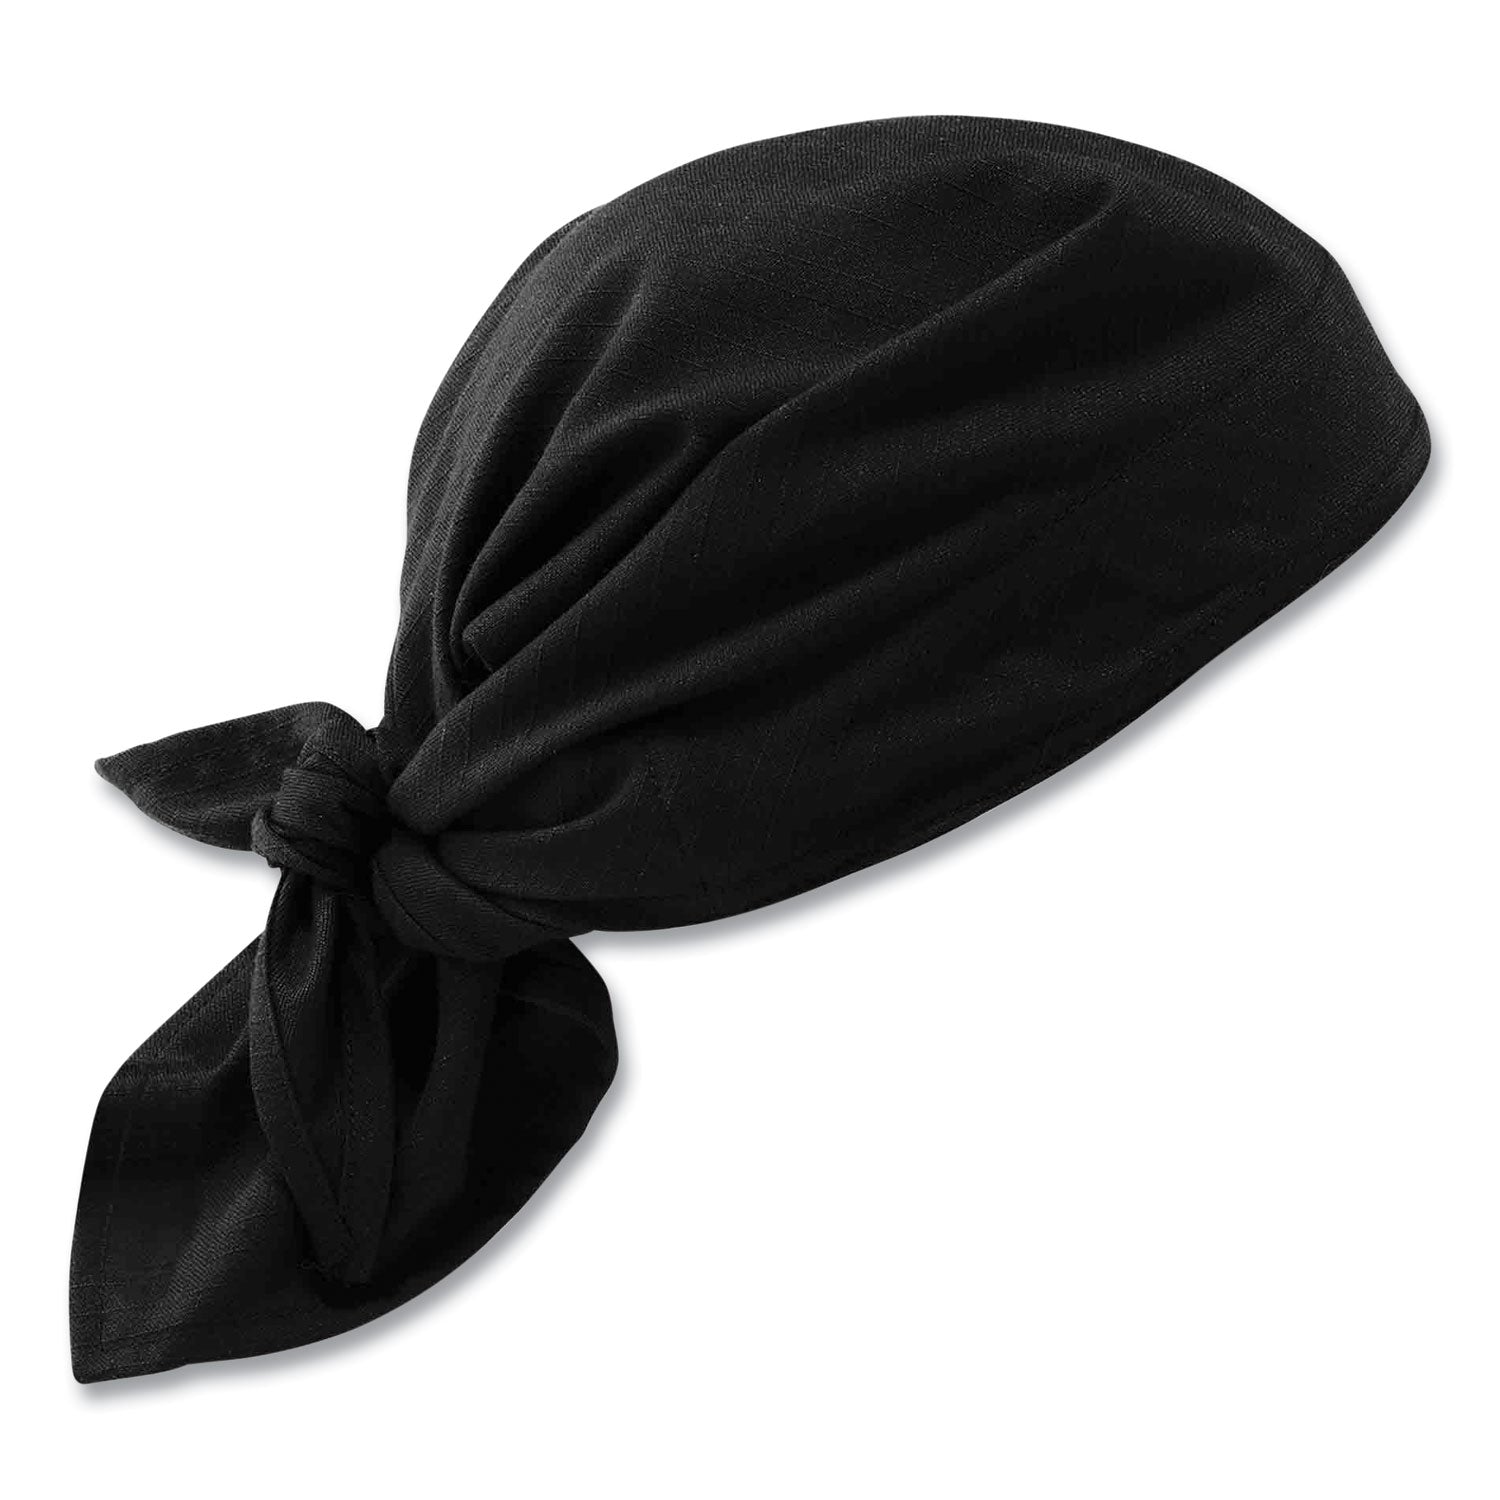 chill-its-6710-cooling-embedded-polymers-tie-bandana-triangle-hat-one-size-fits-most-black-ships-in-1-3-business-days_ego12335 - 1